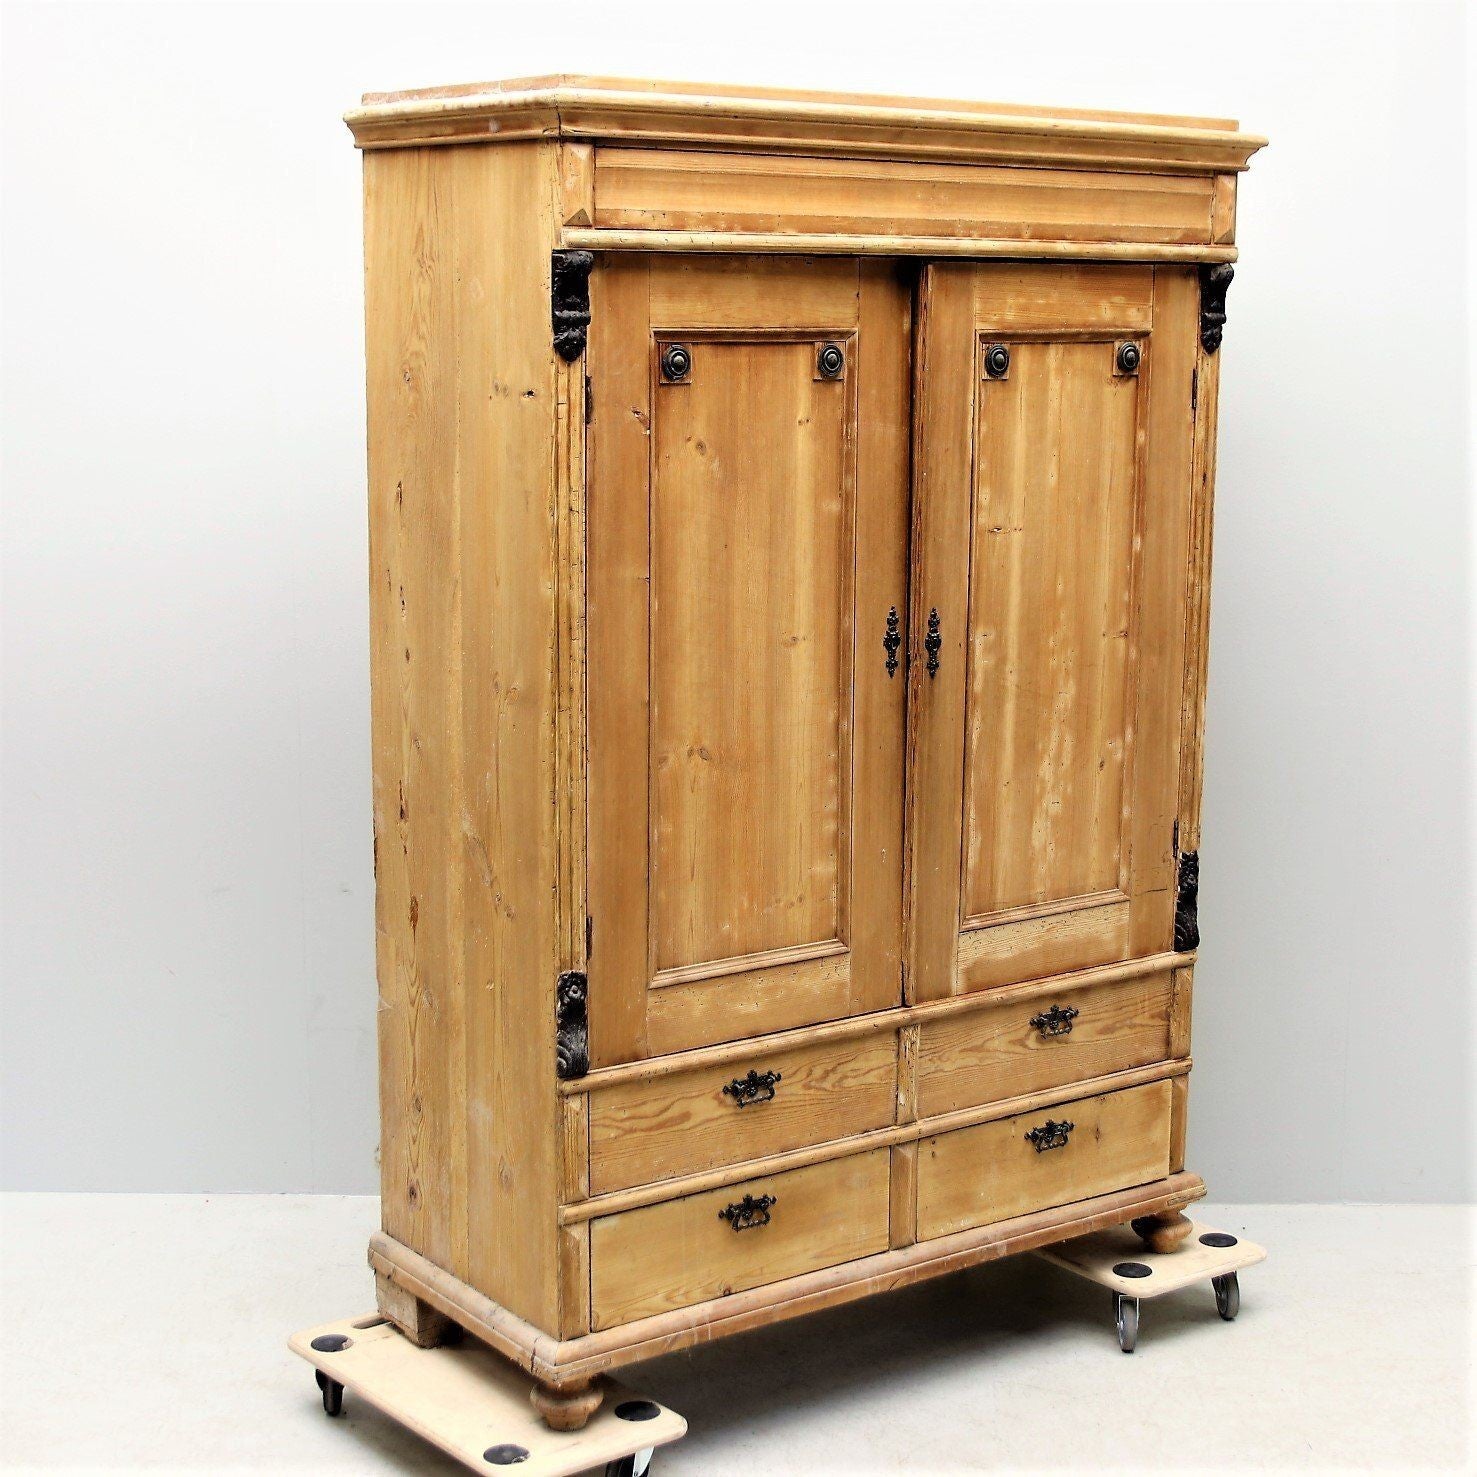 Early 1800s Large Swedish Pine Armoire with Original Hardware